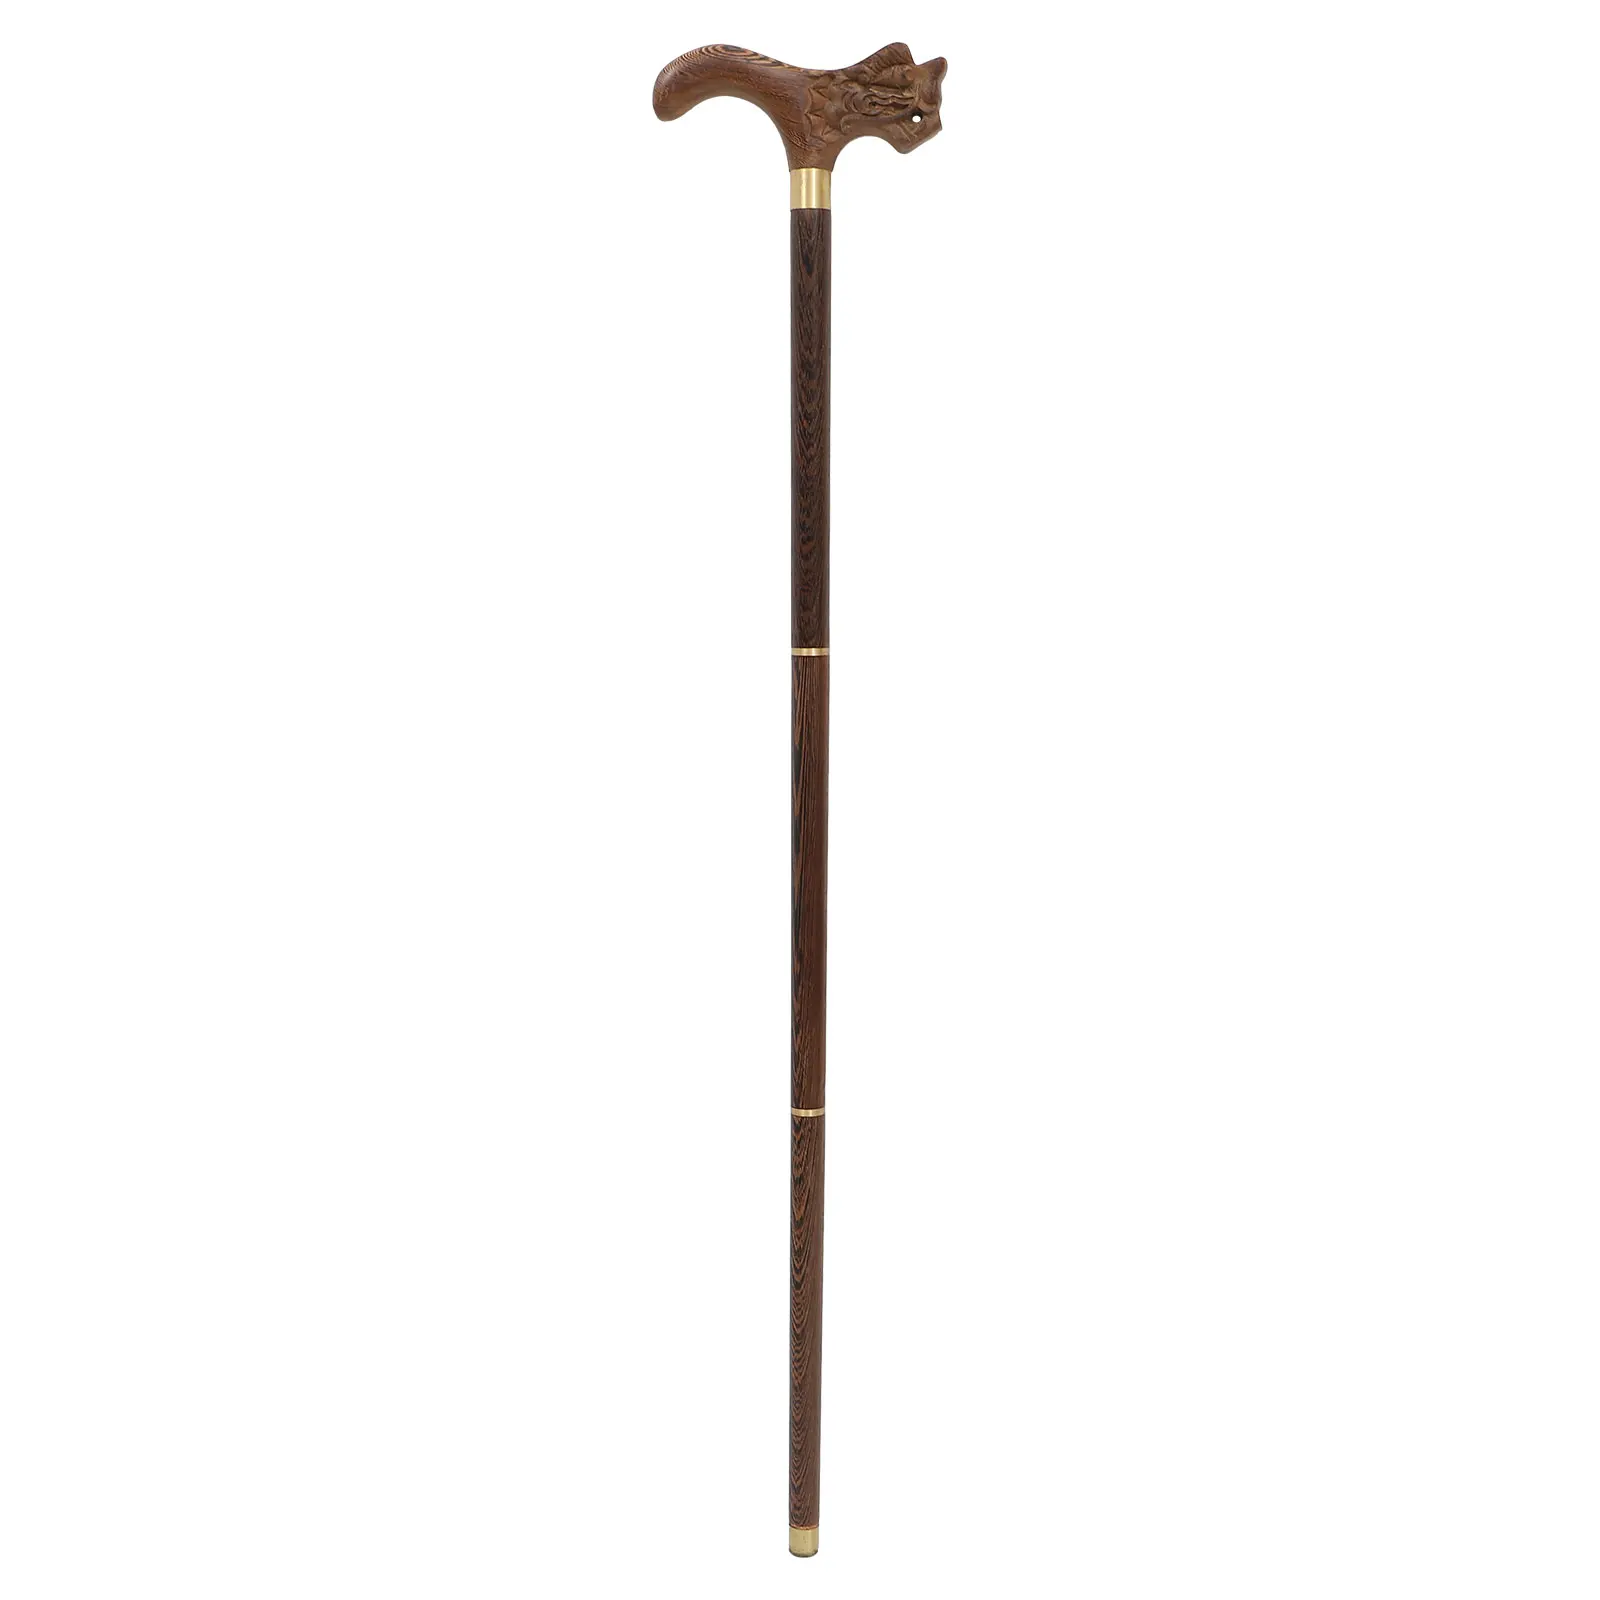 Wooden Walking Stick Detachable Walking Stick Elderly Walking Stick Portable Anti-Skid Walking Pole For Camping Outdoor